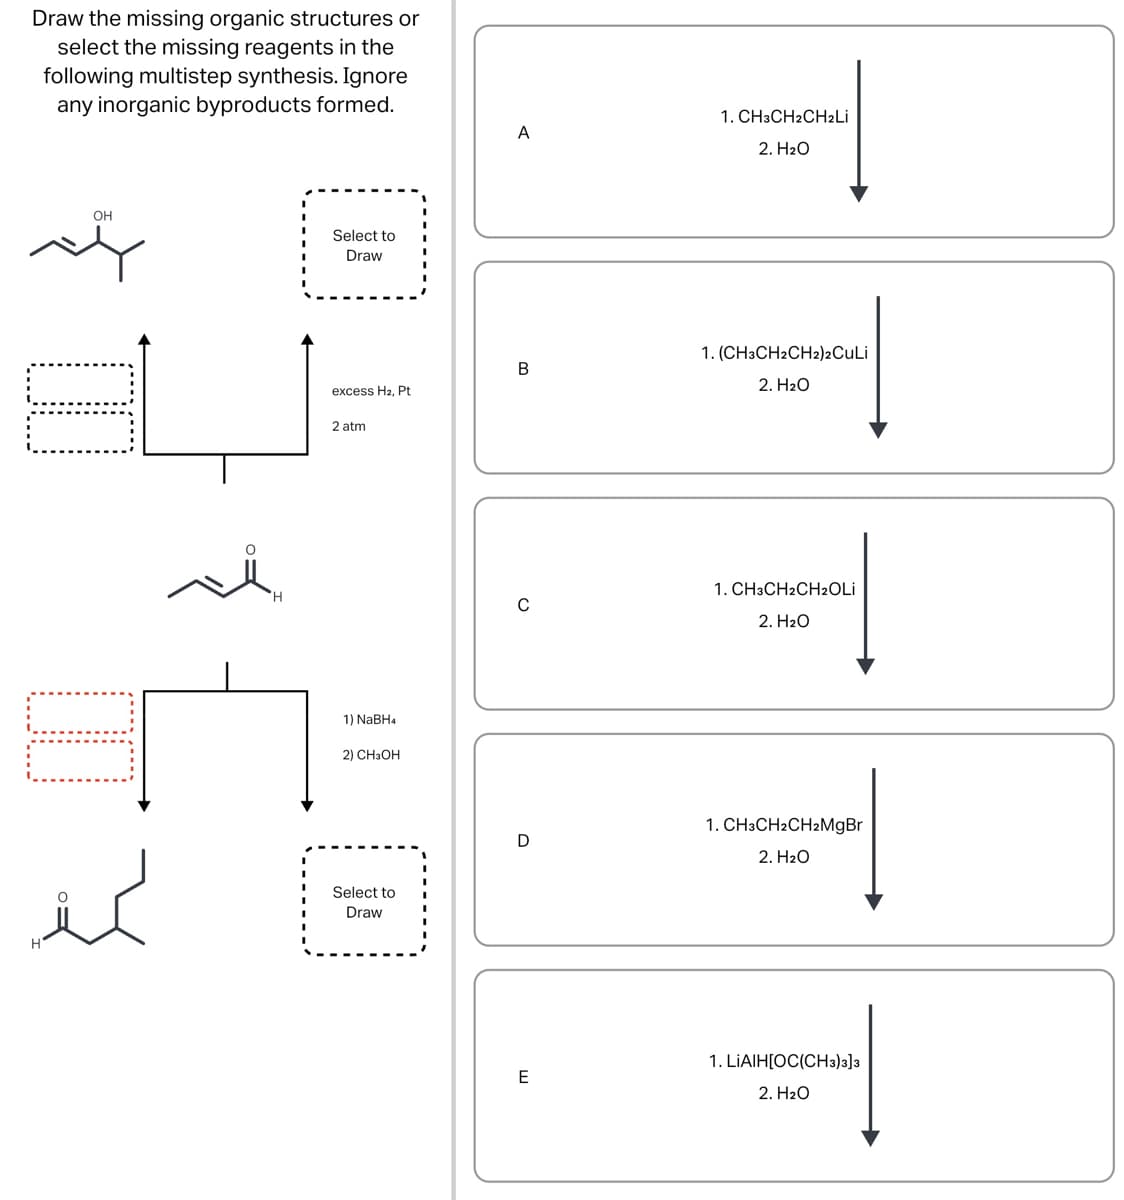 Draw the missing organic structures or
select the missing reagents in the
following multistep synthesis. Ignore
any inorganic byproducts formed.
OH
لمنذر
H
Select to
Draw
excess H2, Pt
2 atm
1) NaBH4
2) CH3OH
Select to
Draw
A
B
D
E
1. CH3CH2CH₂Li
2. H₂O
1. (CH3CH2CH2)2CuLi
2. H₂O
1. CH3CH2CH₂OLi
2. H₂O
1. CH3CH2CH2MgBr
2. H₂O
1. LIAIH[OC(CH3)3]3
2. H₂O